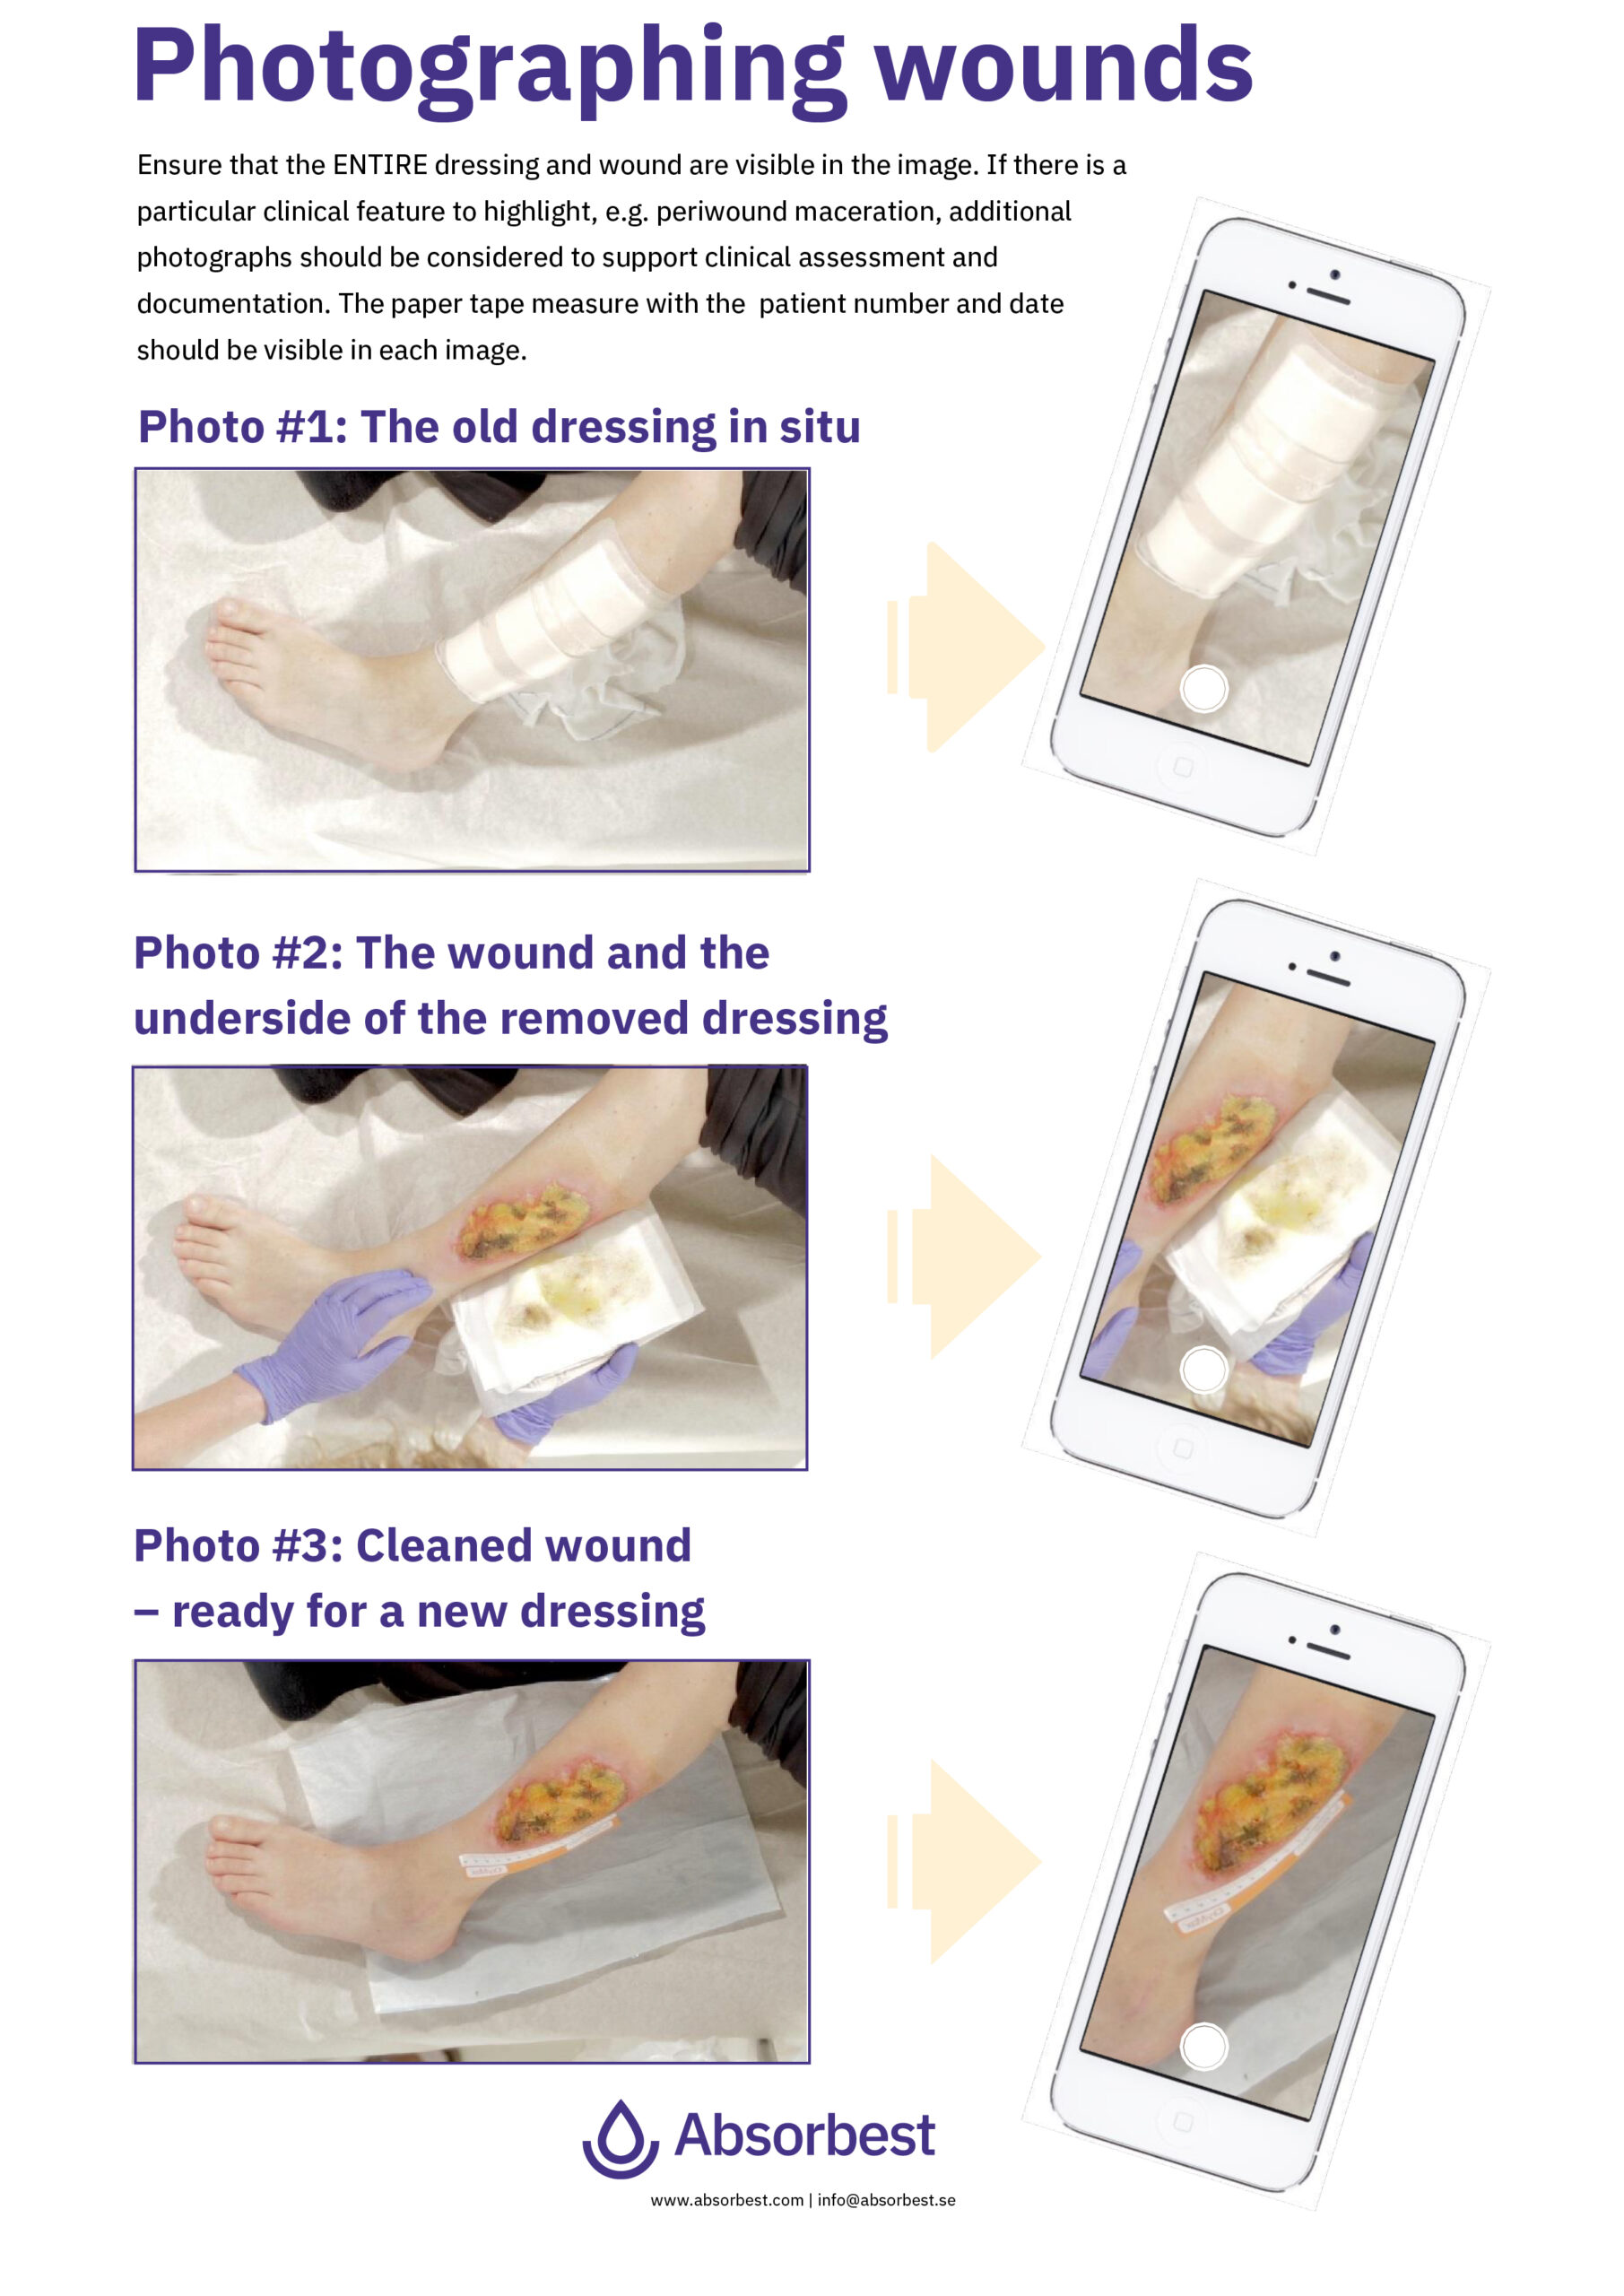 Simple guiding for photo documentation in a wound care process.